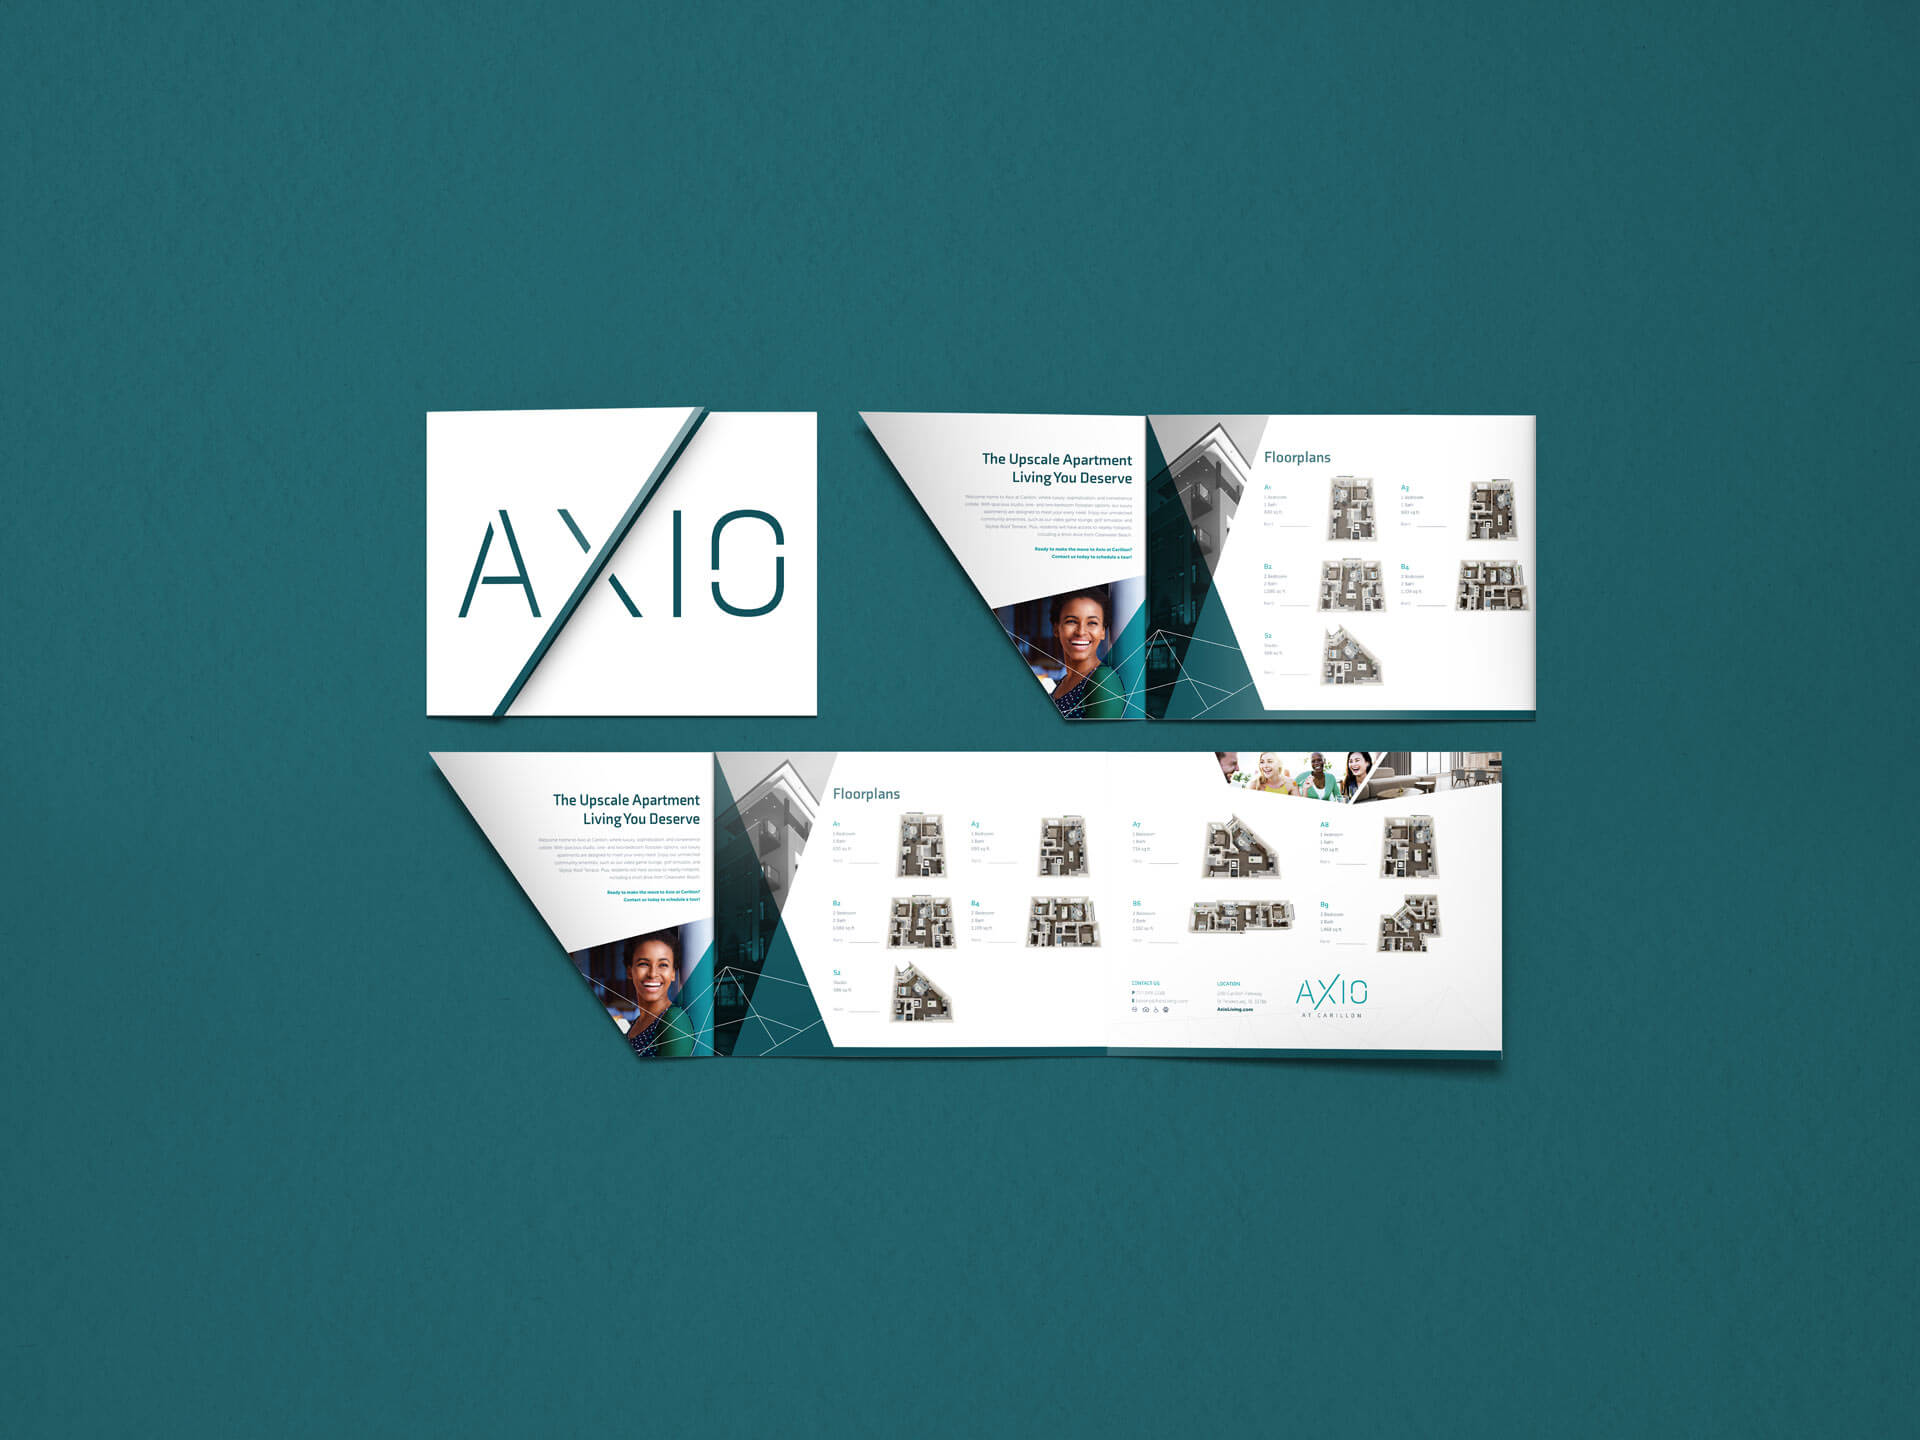 Explore Our AXIO at Carillon Work and Multifamily Marketing Services at Criterion.B Multifamily Branding Agency